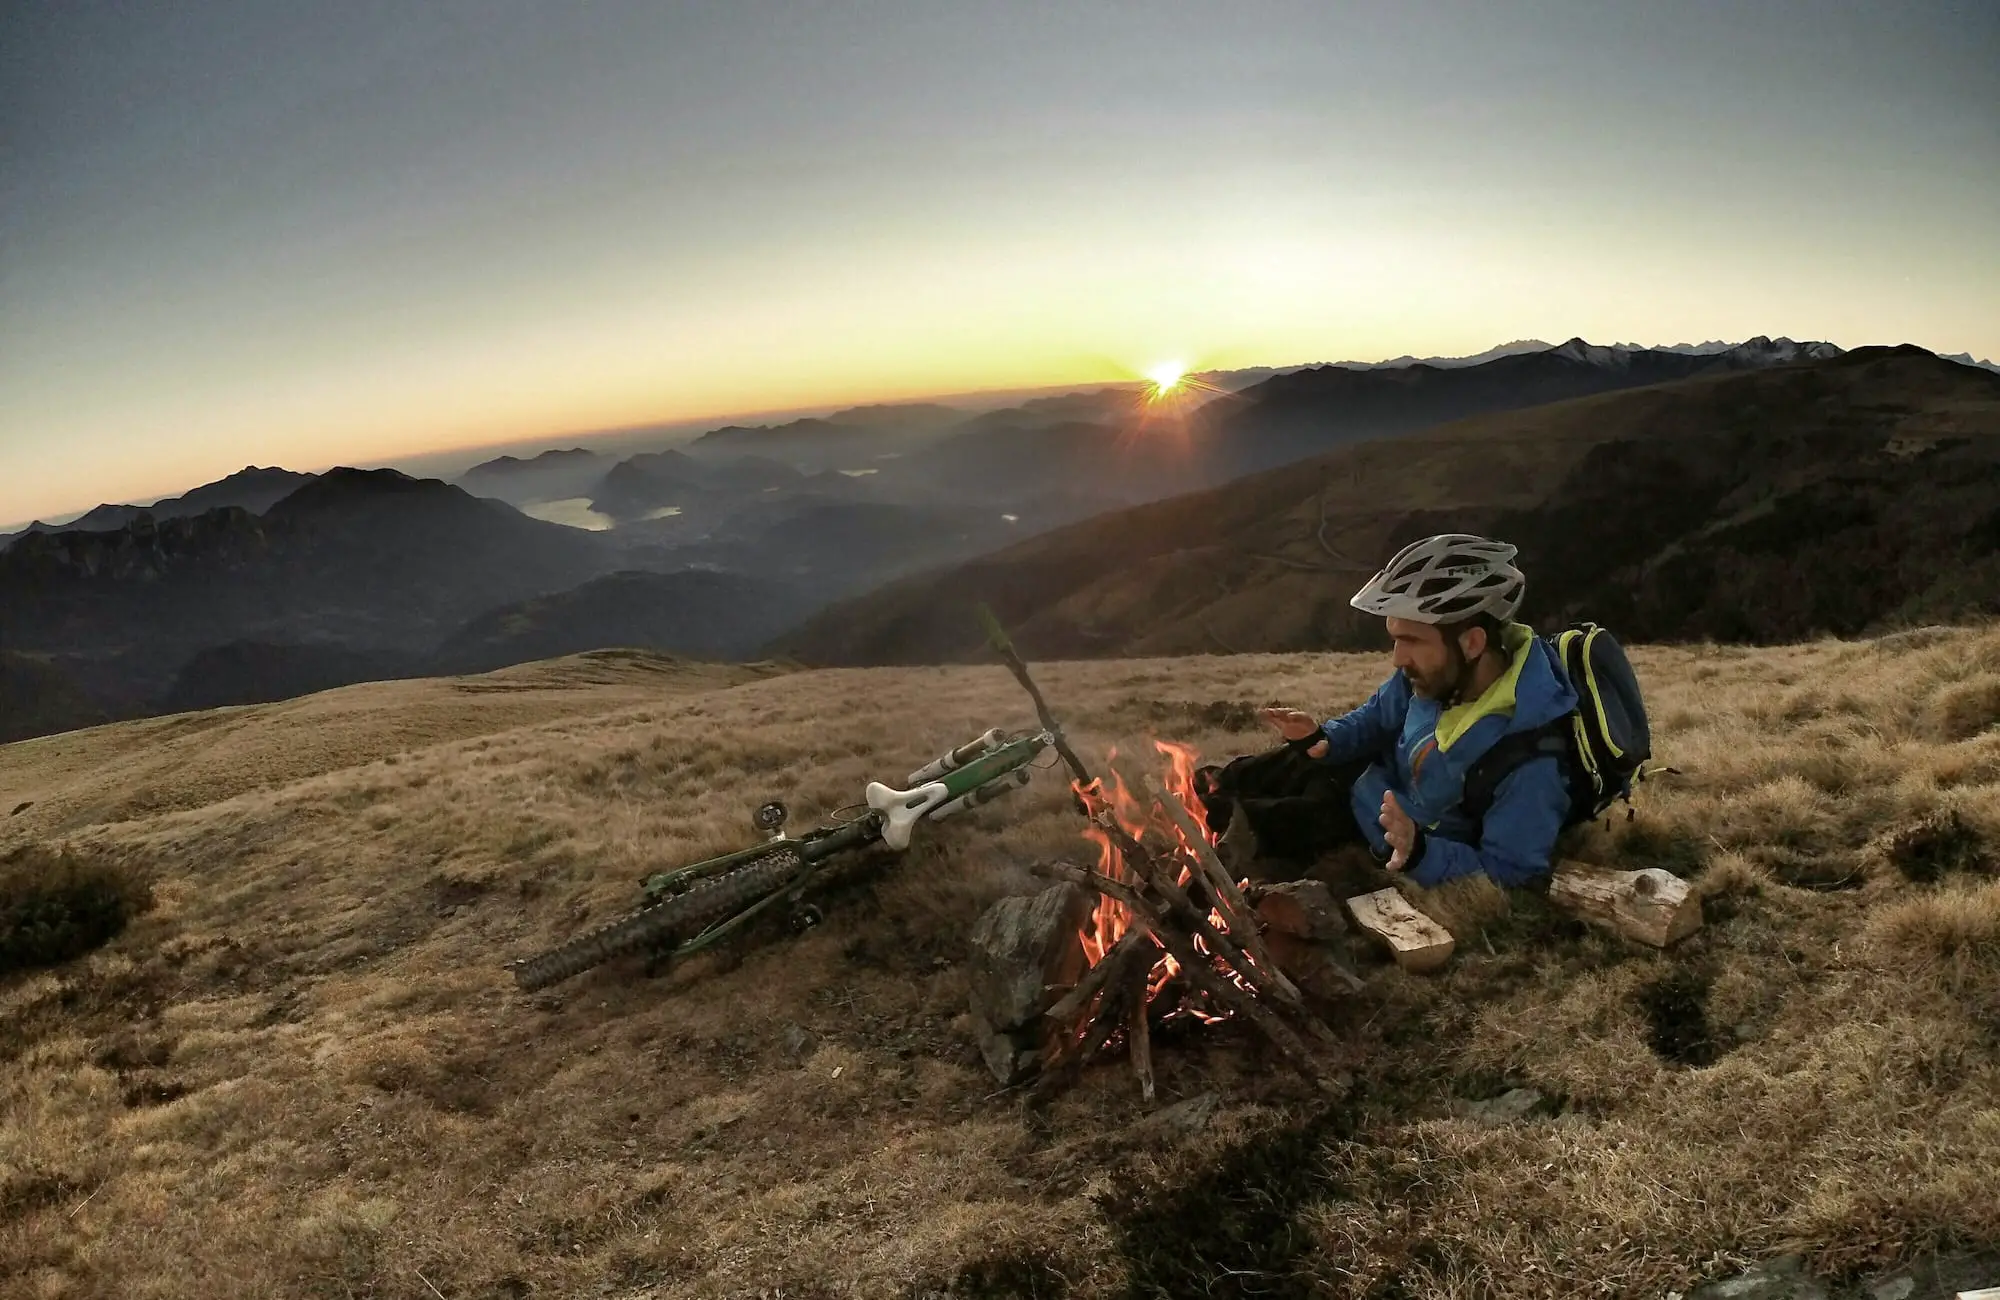 bikepacking trips in the united states